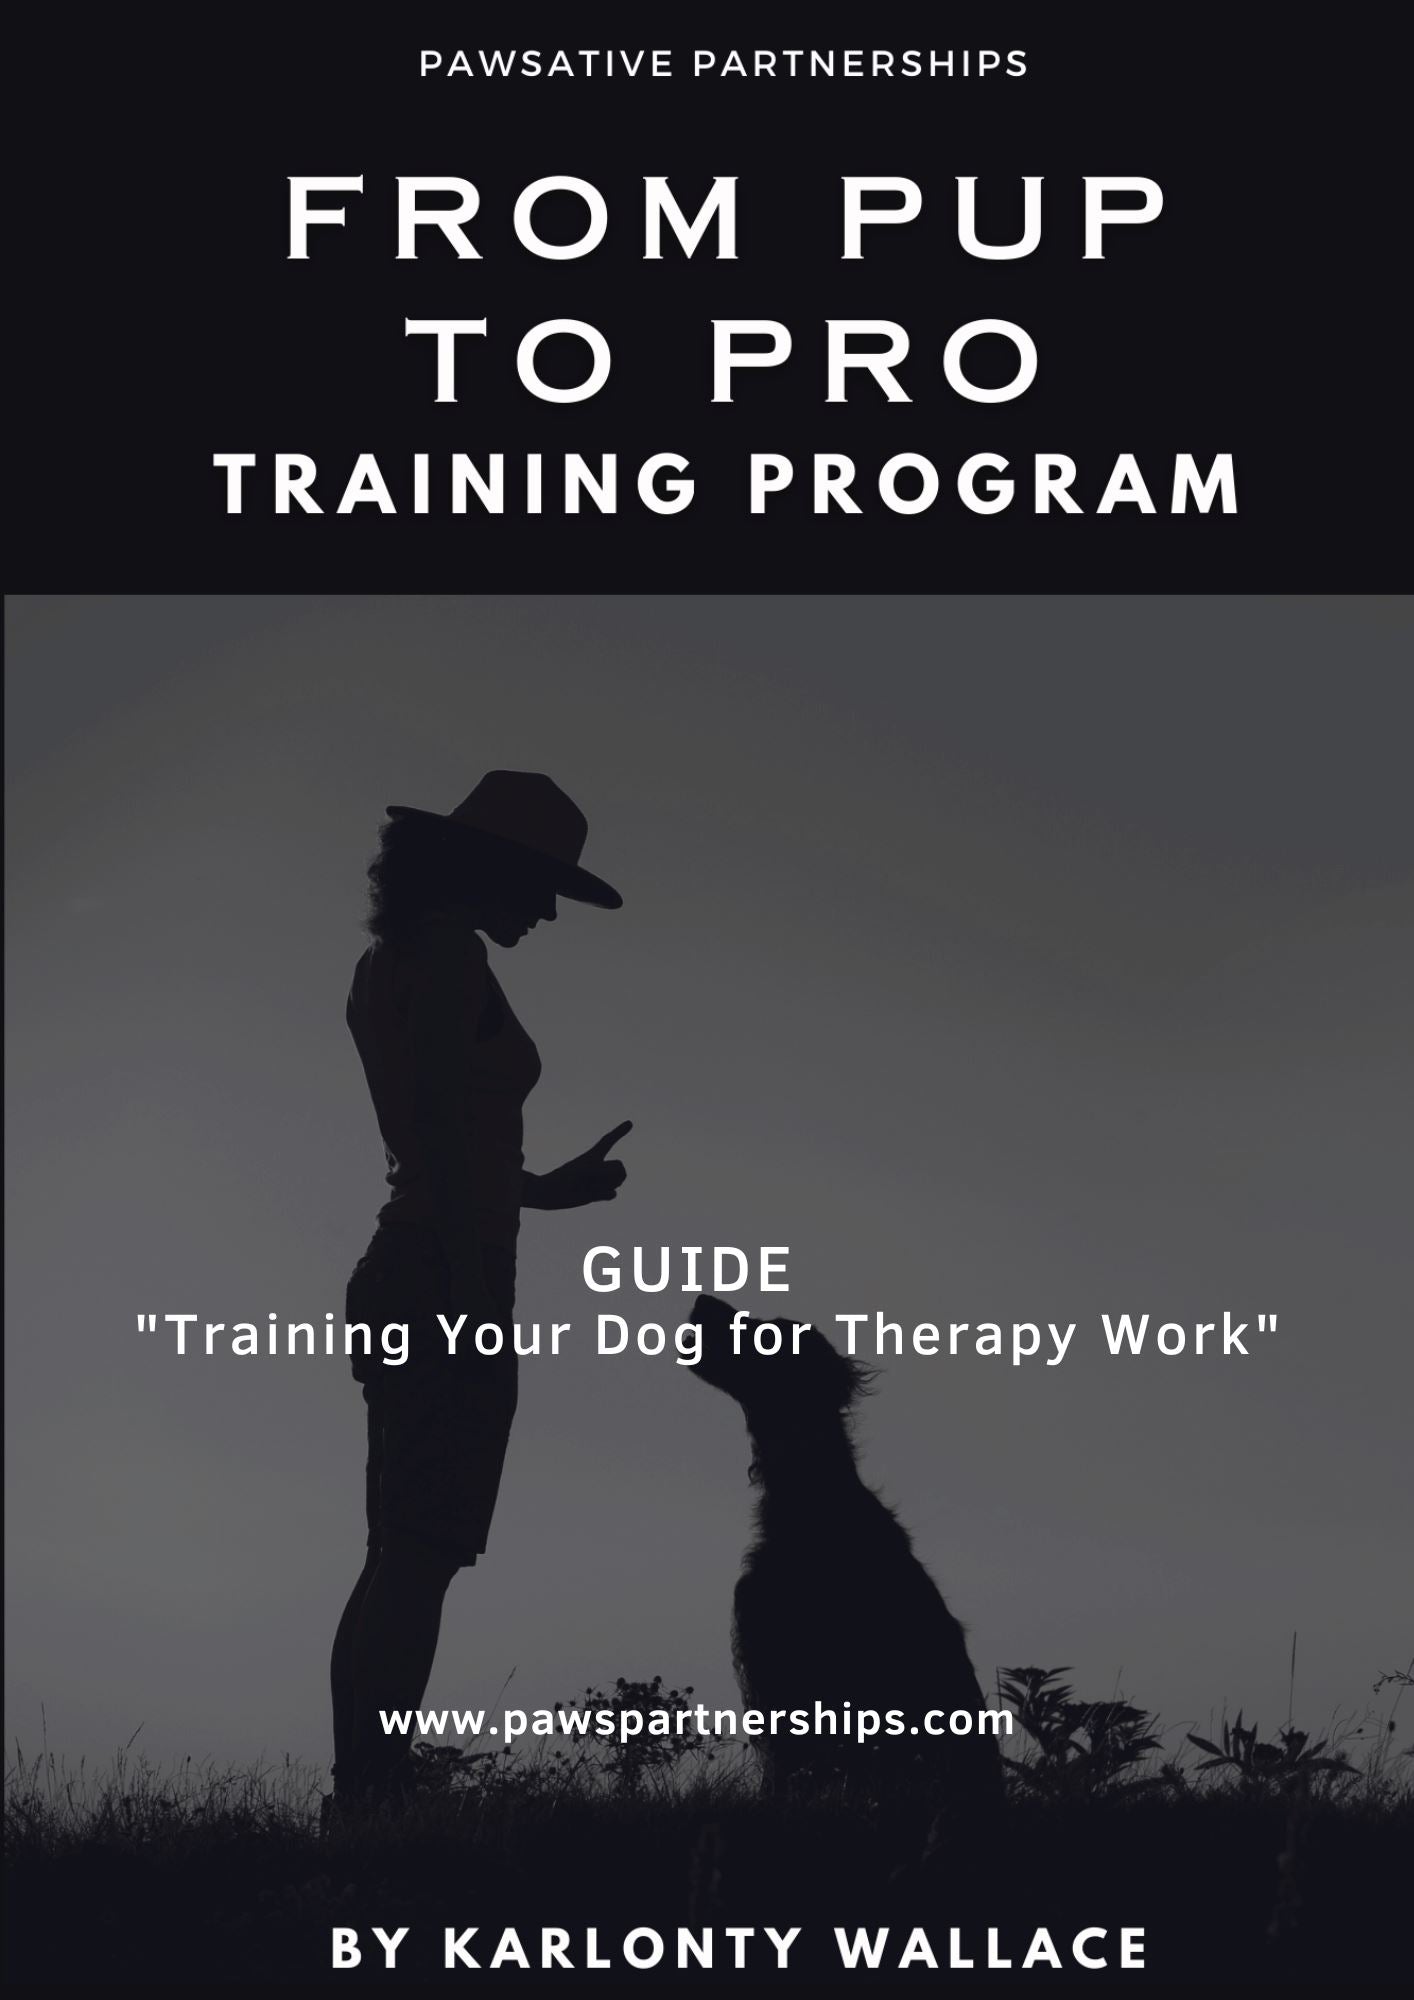 Looking for a comprehensive training program to prepare your pup for therapy work? Look no further than From Pup to Pro! Our digital course is designed to equip dogs of all ages with the skills and behaviors they need to thrive as working therapy dogs.